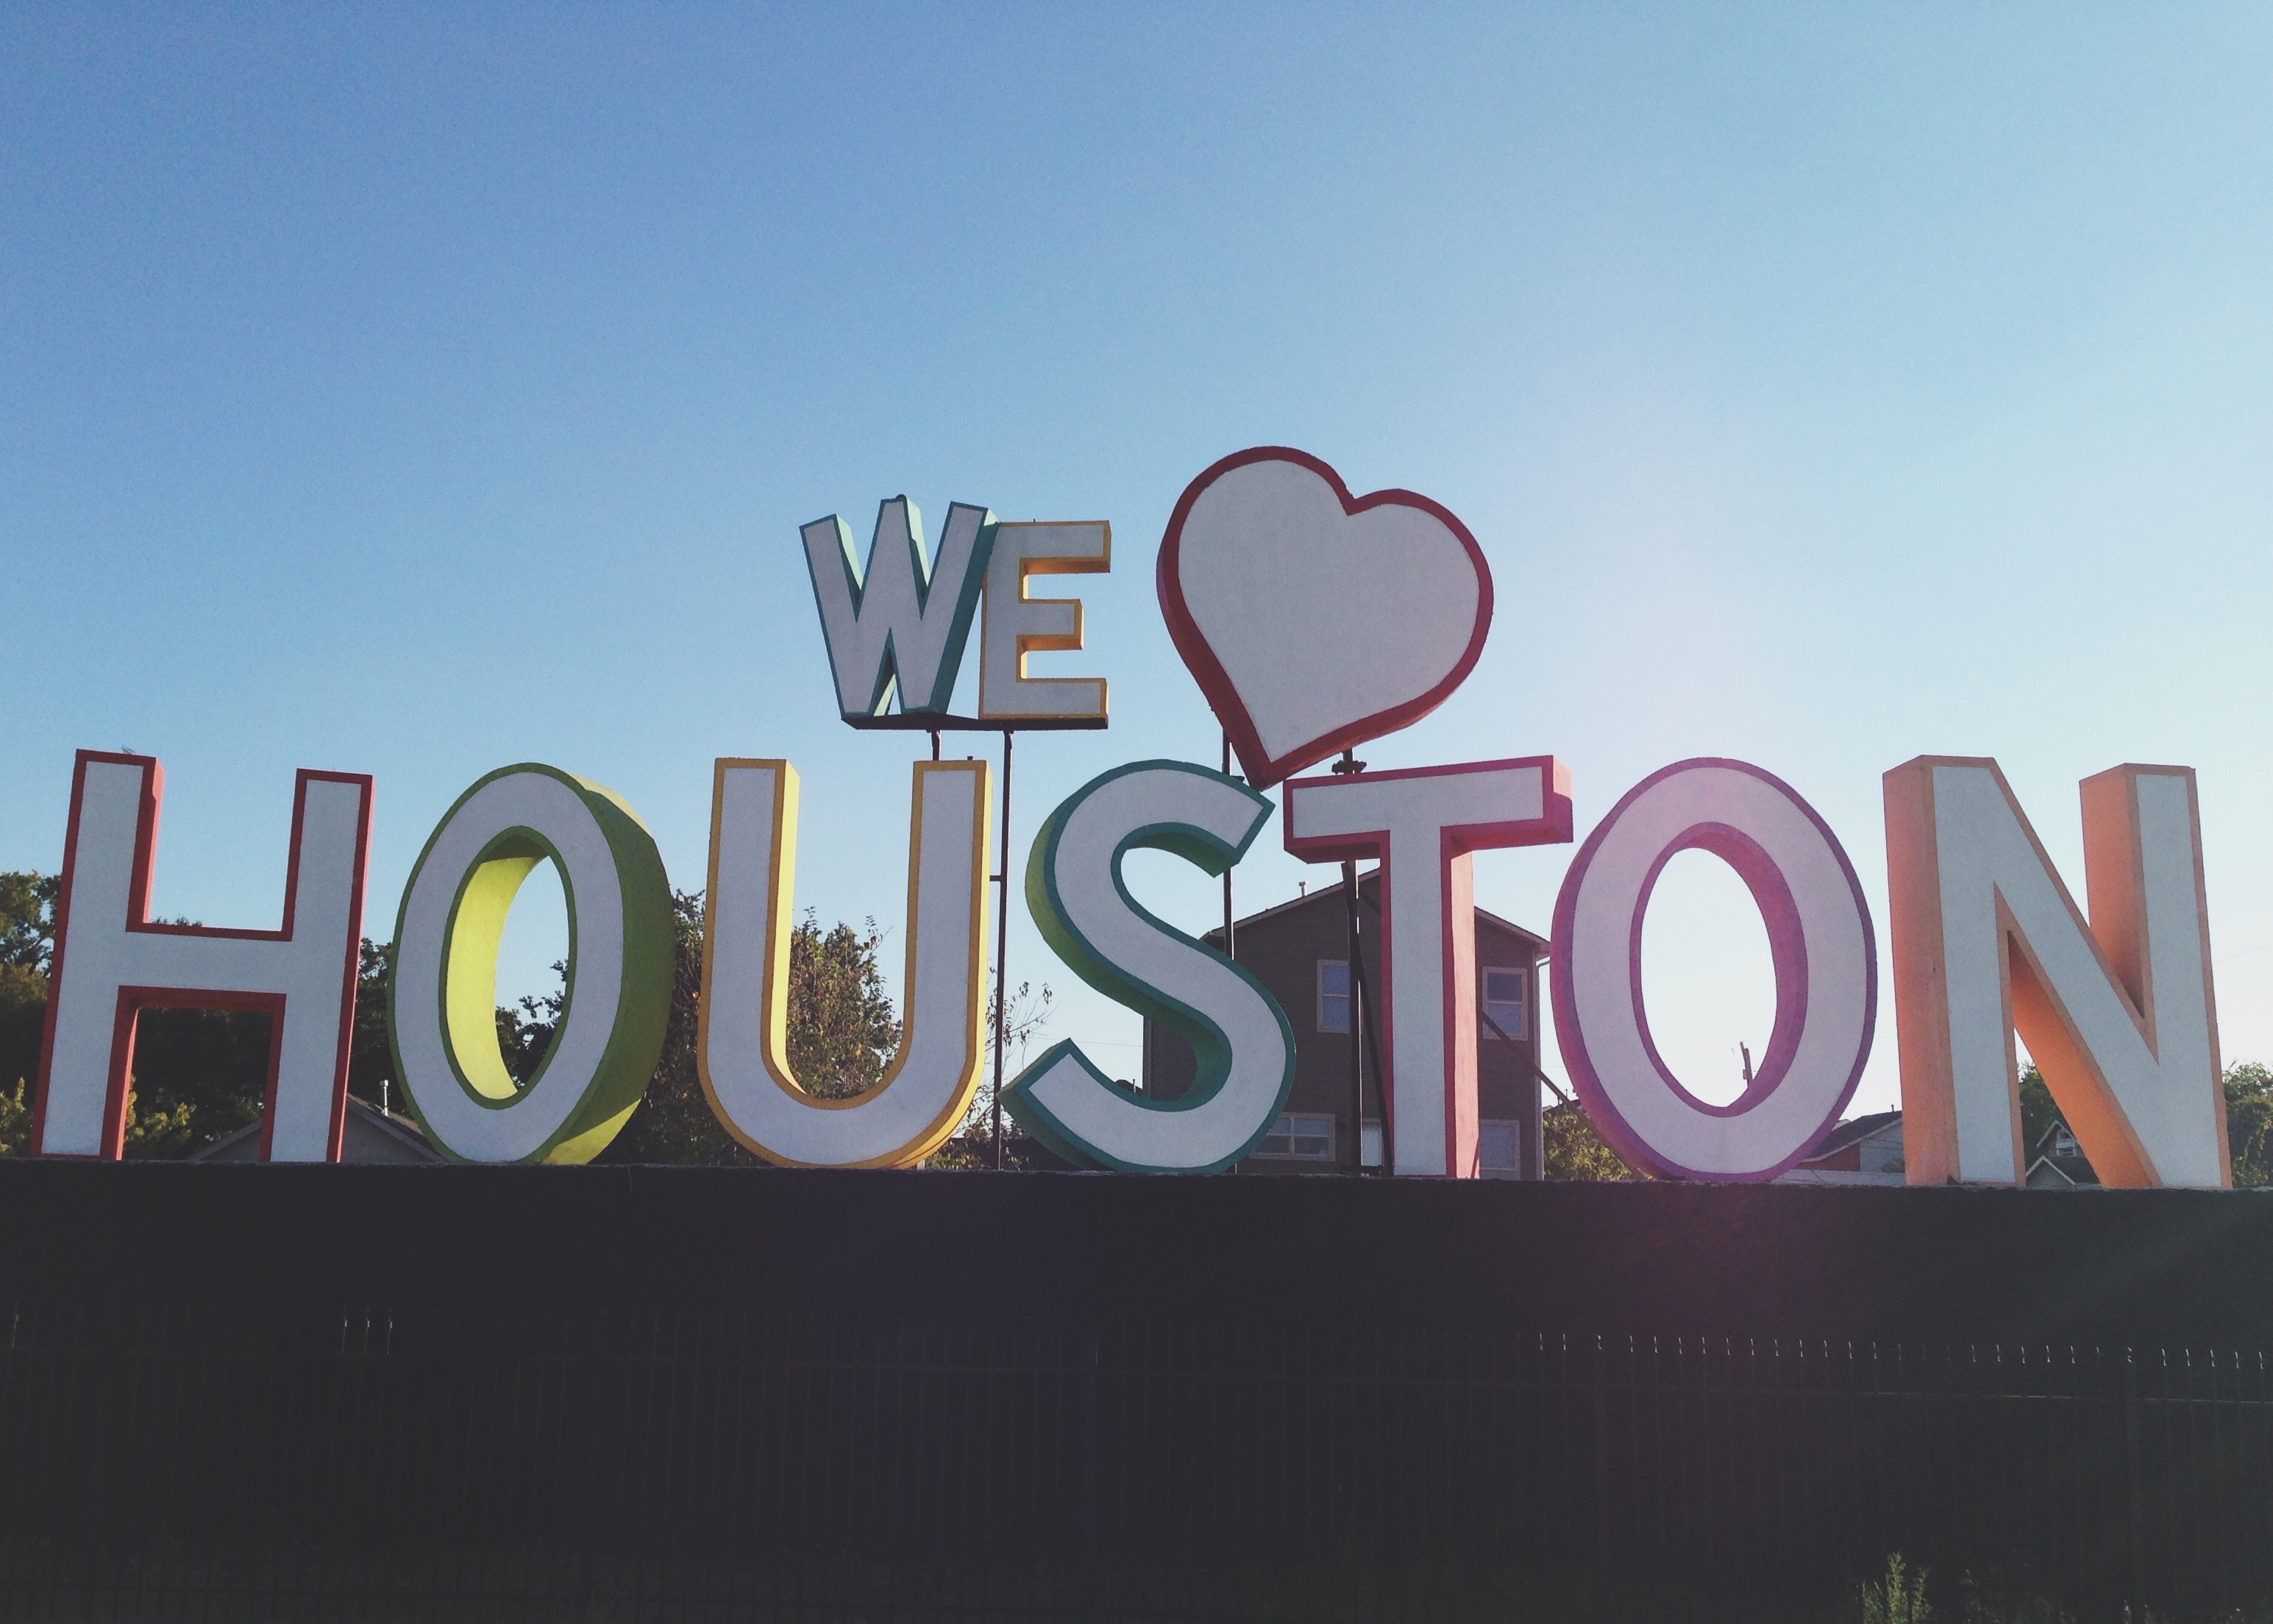 We love attending the Houston Forum every year!